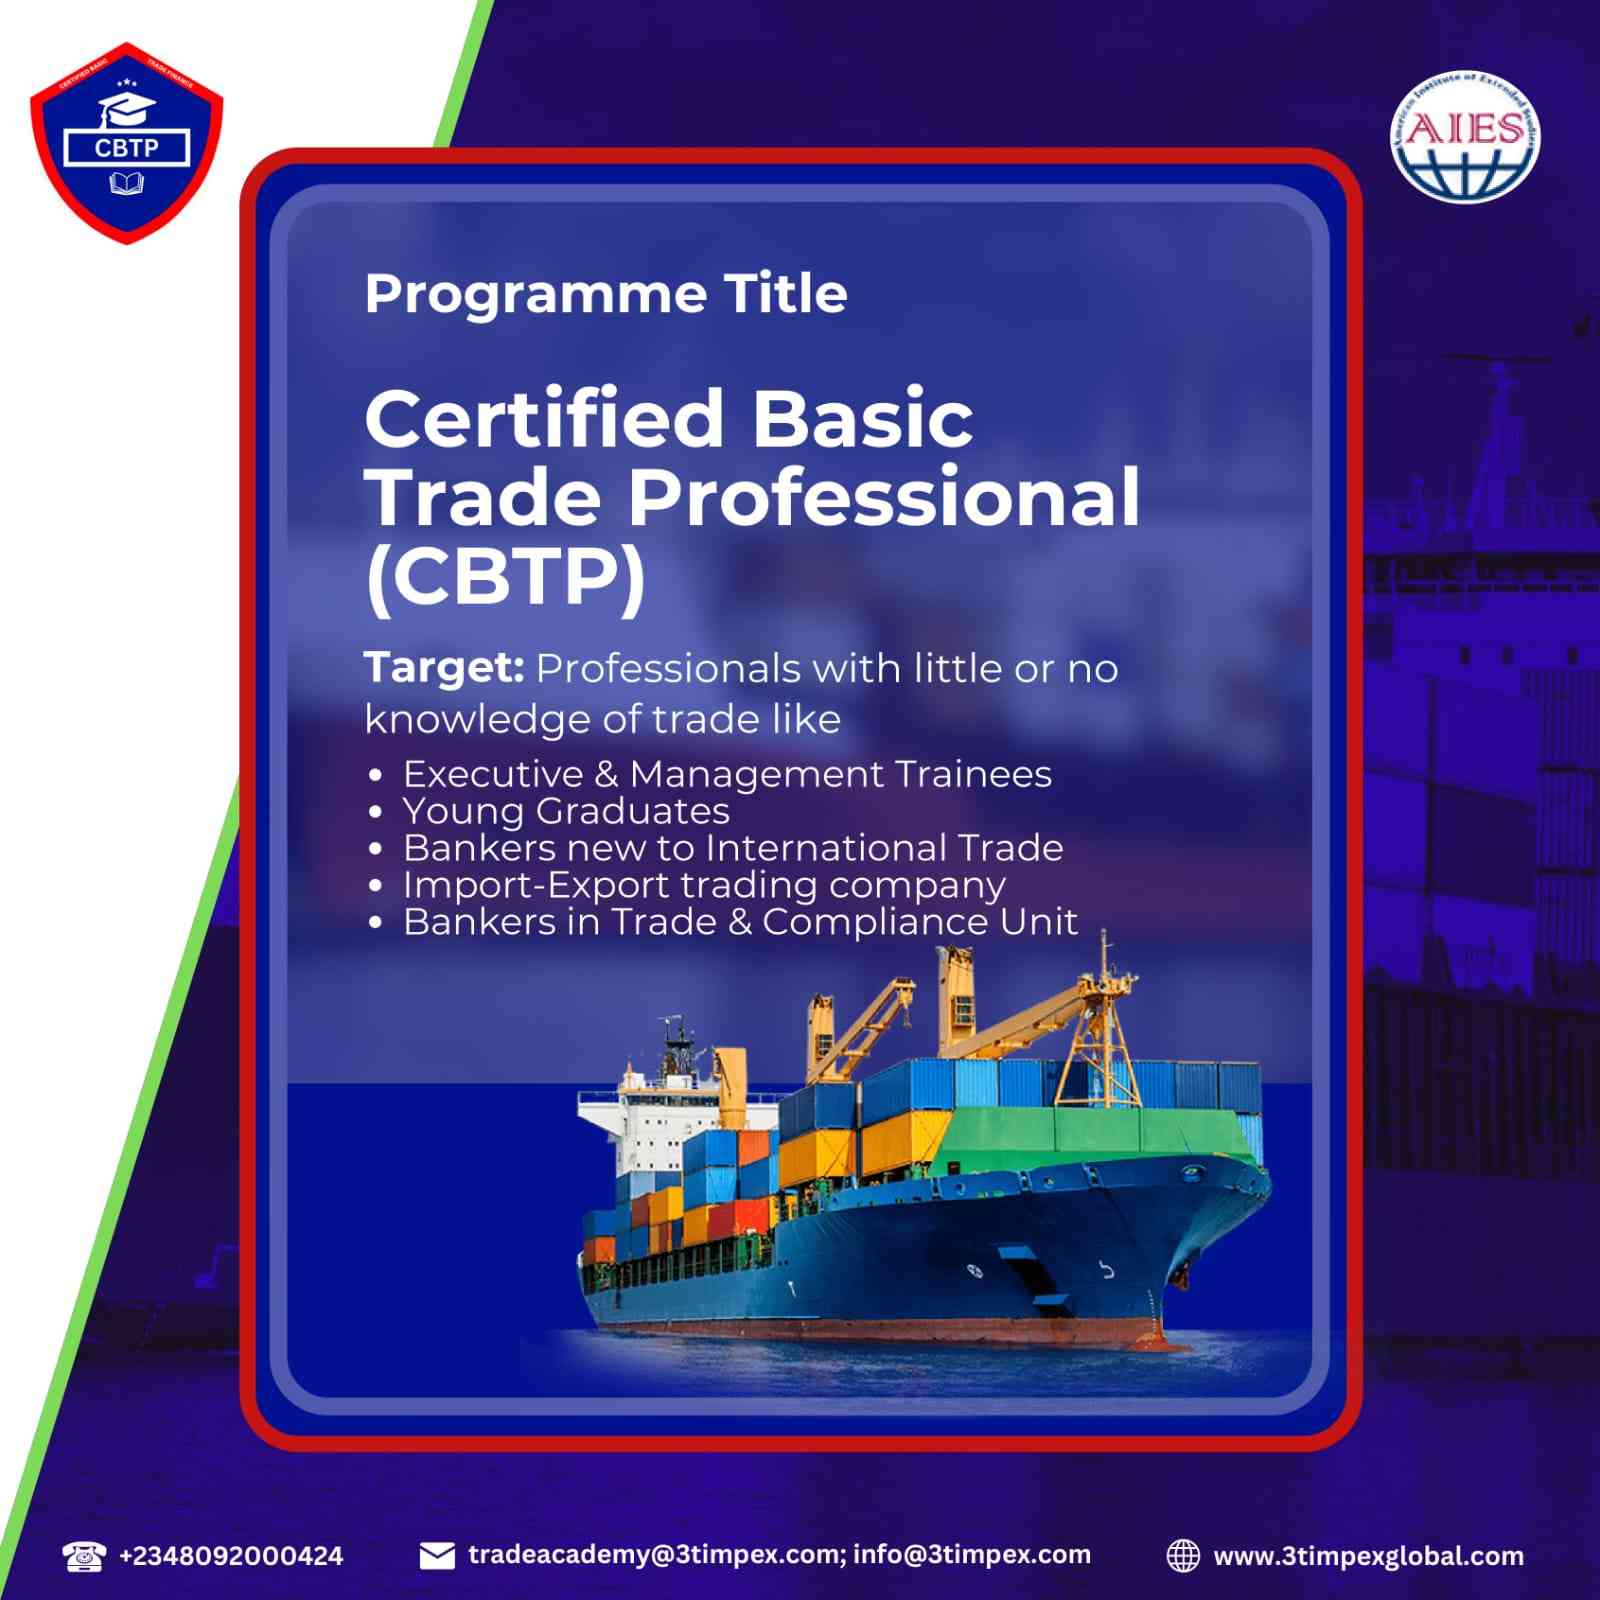 Certified Basic Trade Professional